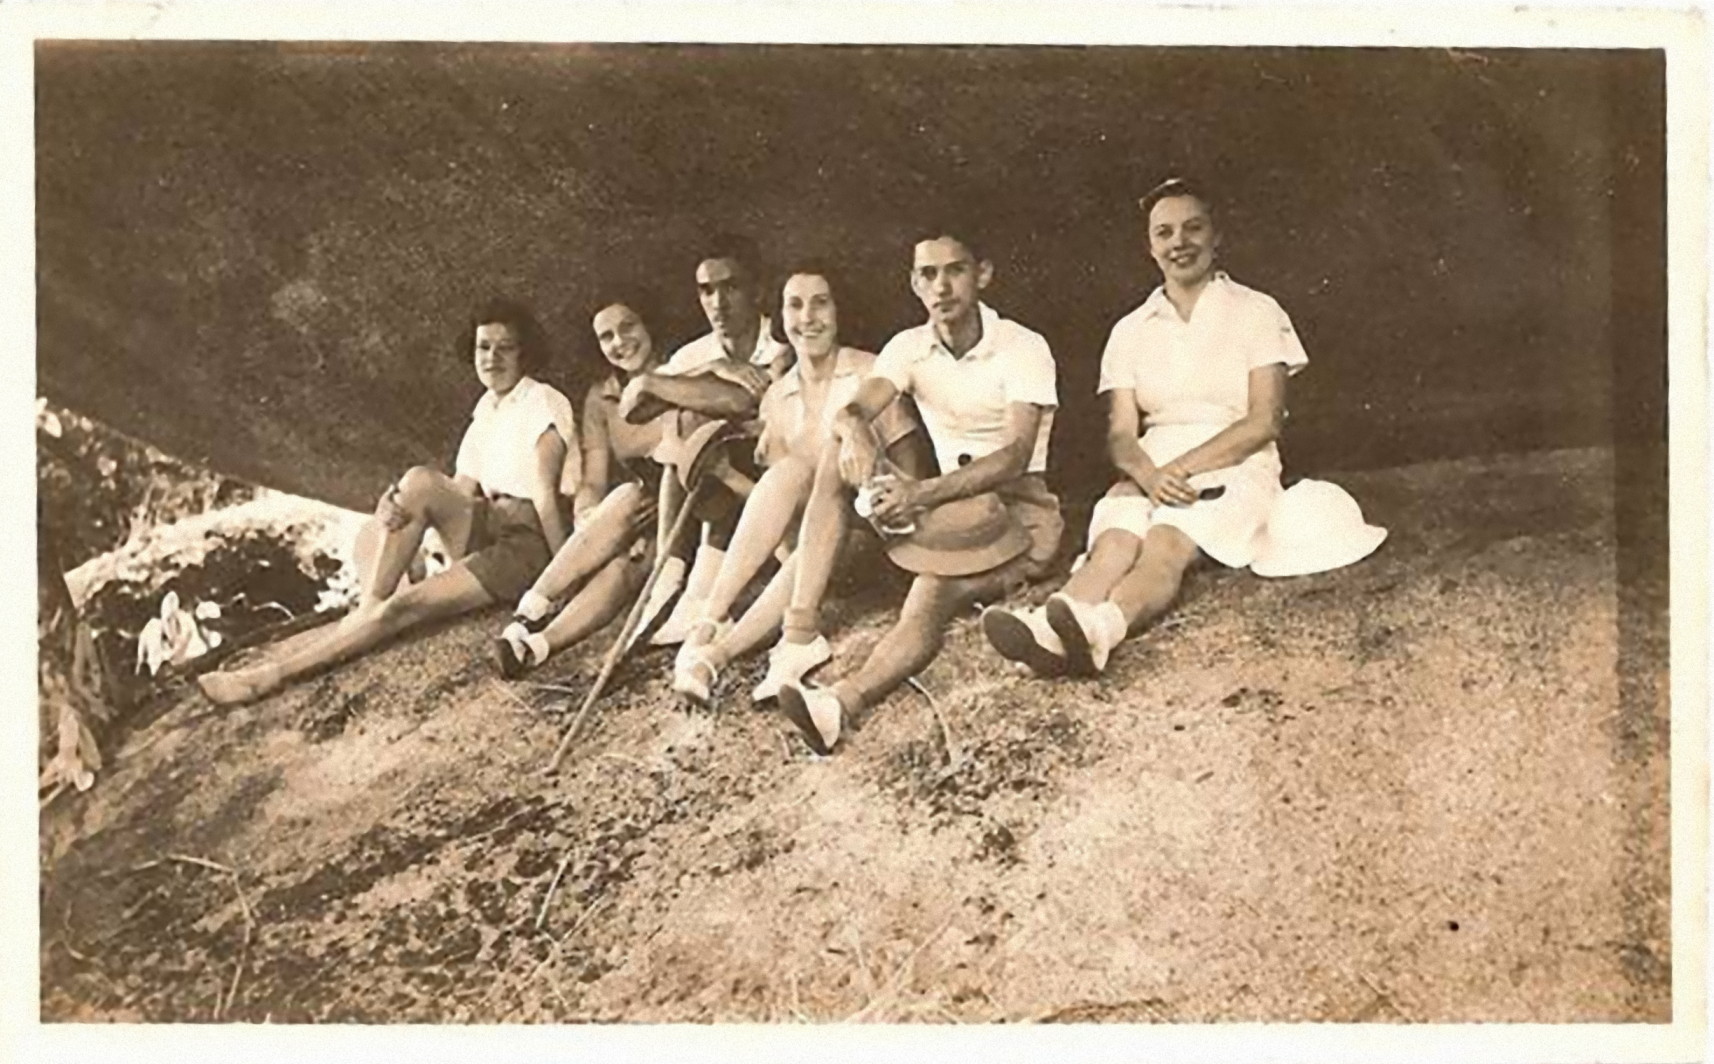 sepia photo\' showing six people all in about their twenties, dressed in lightweight summer clothes - from the left girl, girl, boy, girl, boy, girl - seated on an expanse of mossy rock with another huge curve of rock above them, rather as if they were sitting in the crack between two enormous bowling balls balanced one on top of the other